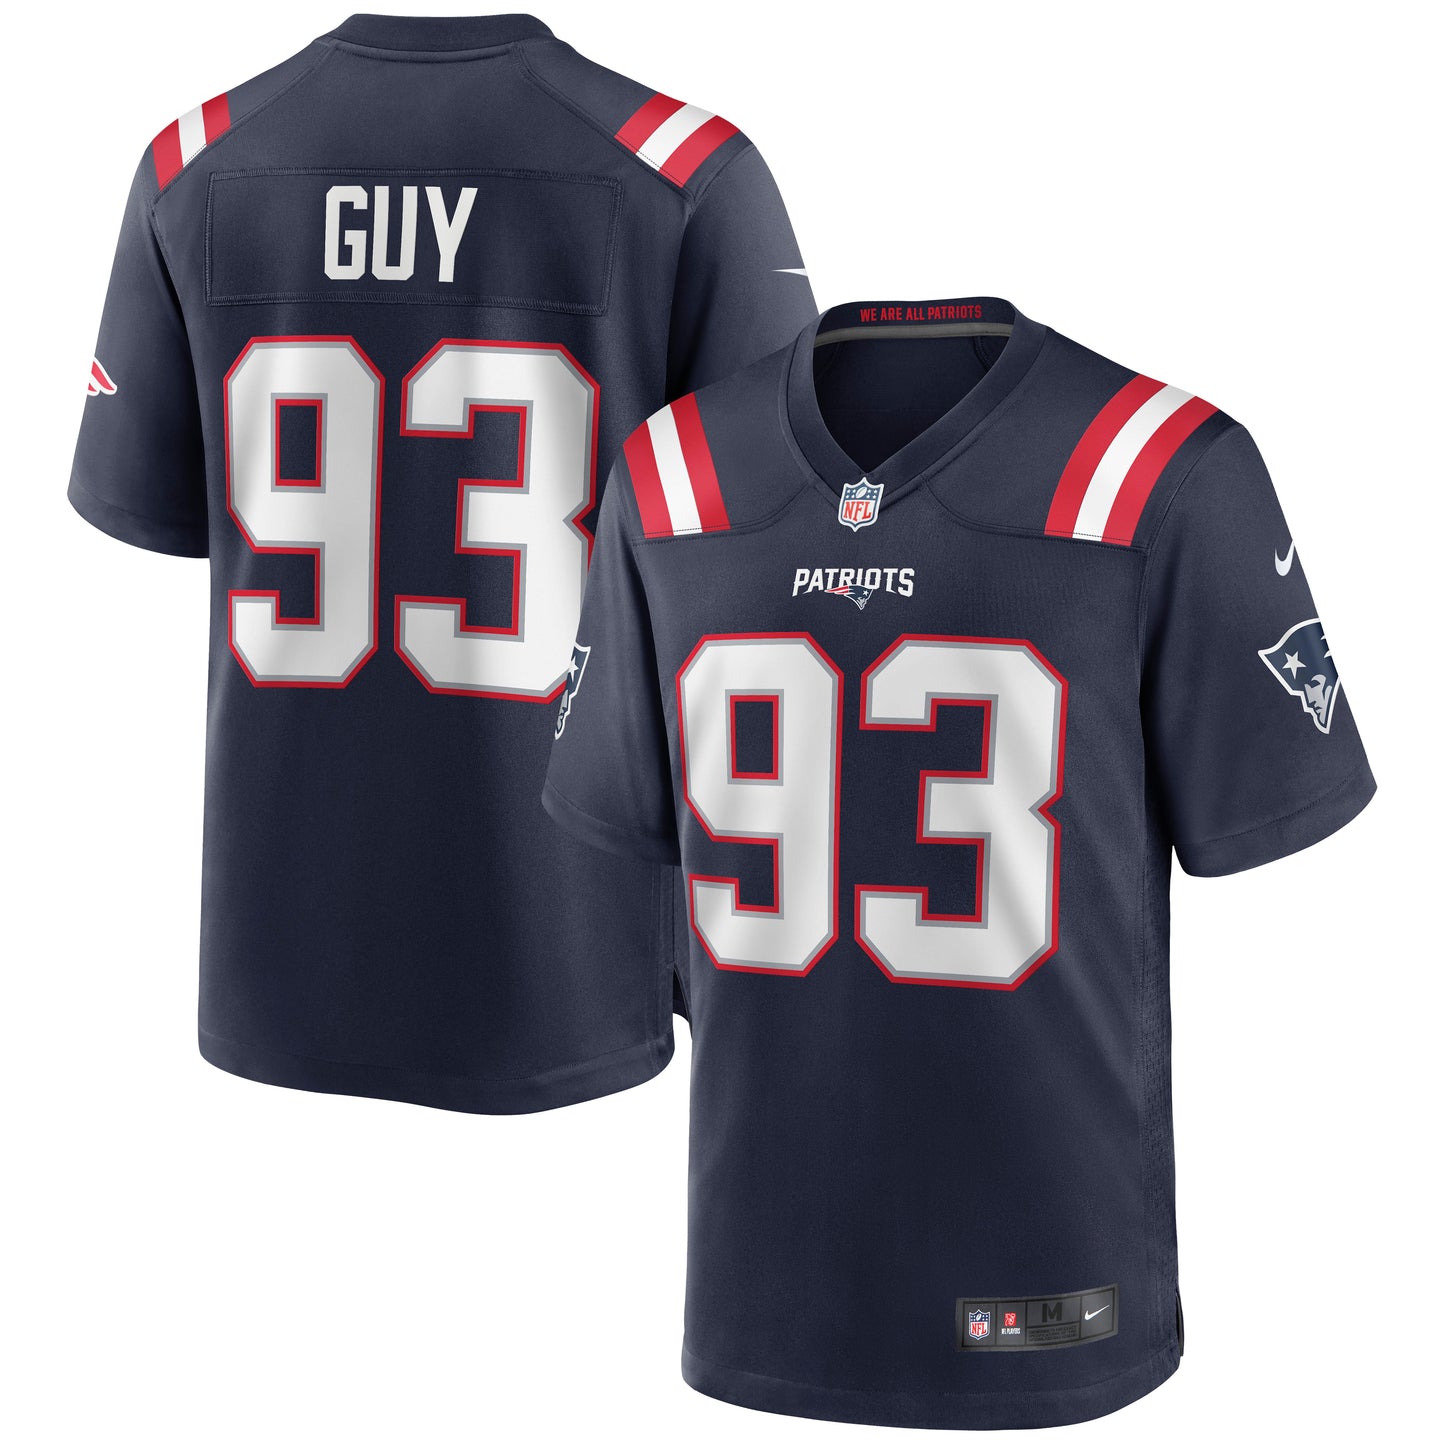 Lawrence Guy New England Patriots Nike Game Jersey - Navy